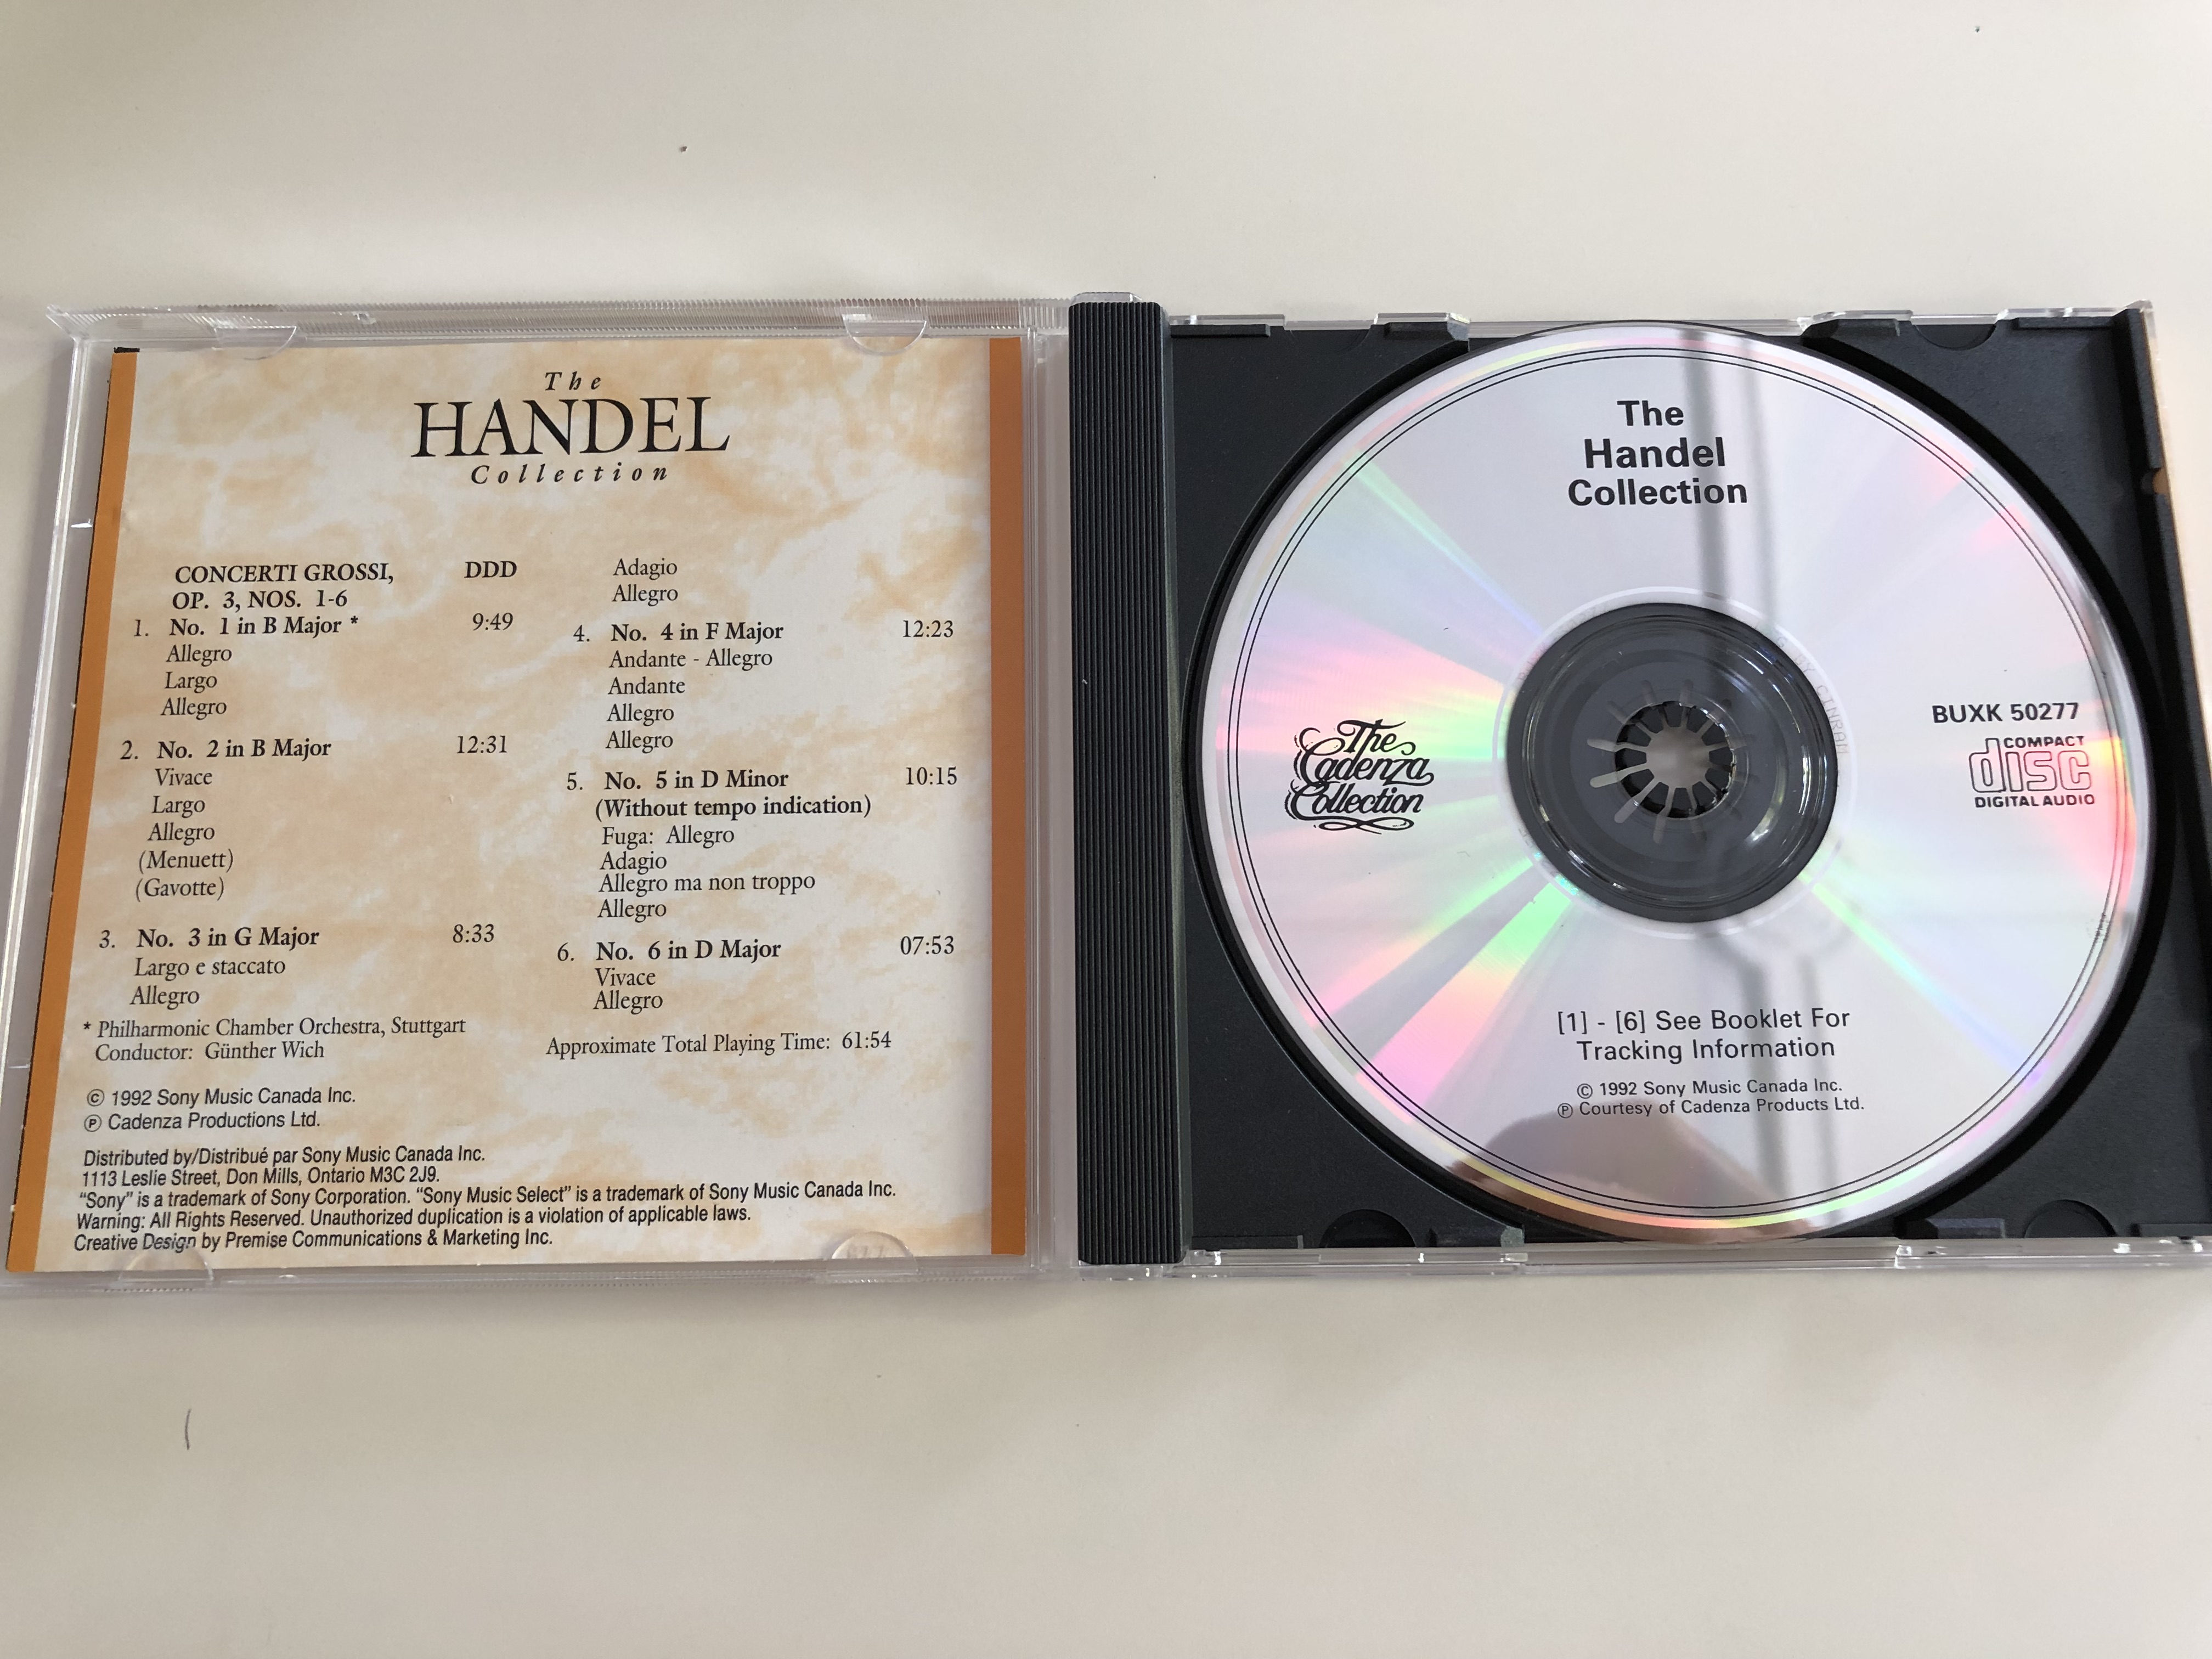 the-handel-collection-deluxe-edition-philharmonic-chamber-orchestra-stuttgart-conductor-g-nther-wich-audio-cd-1992-candenza-productions-3-.jpg